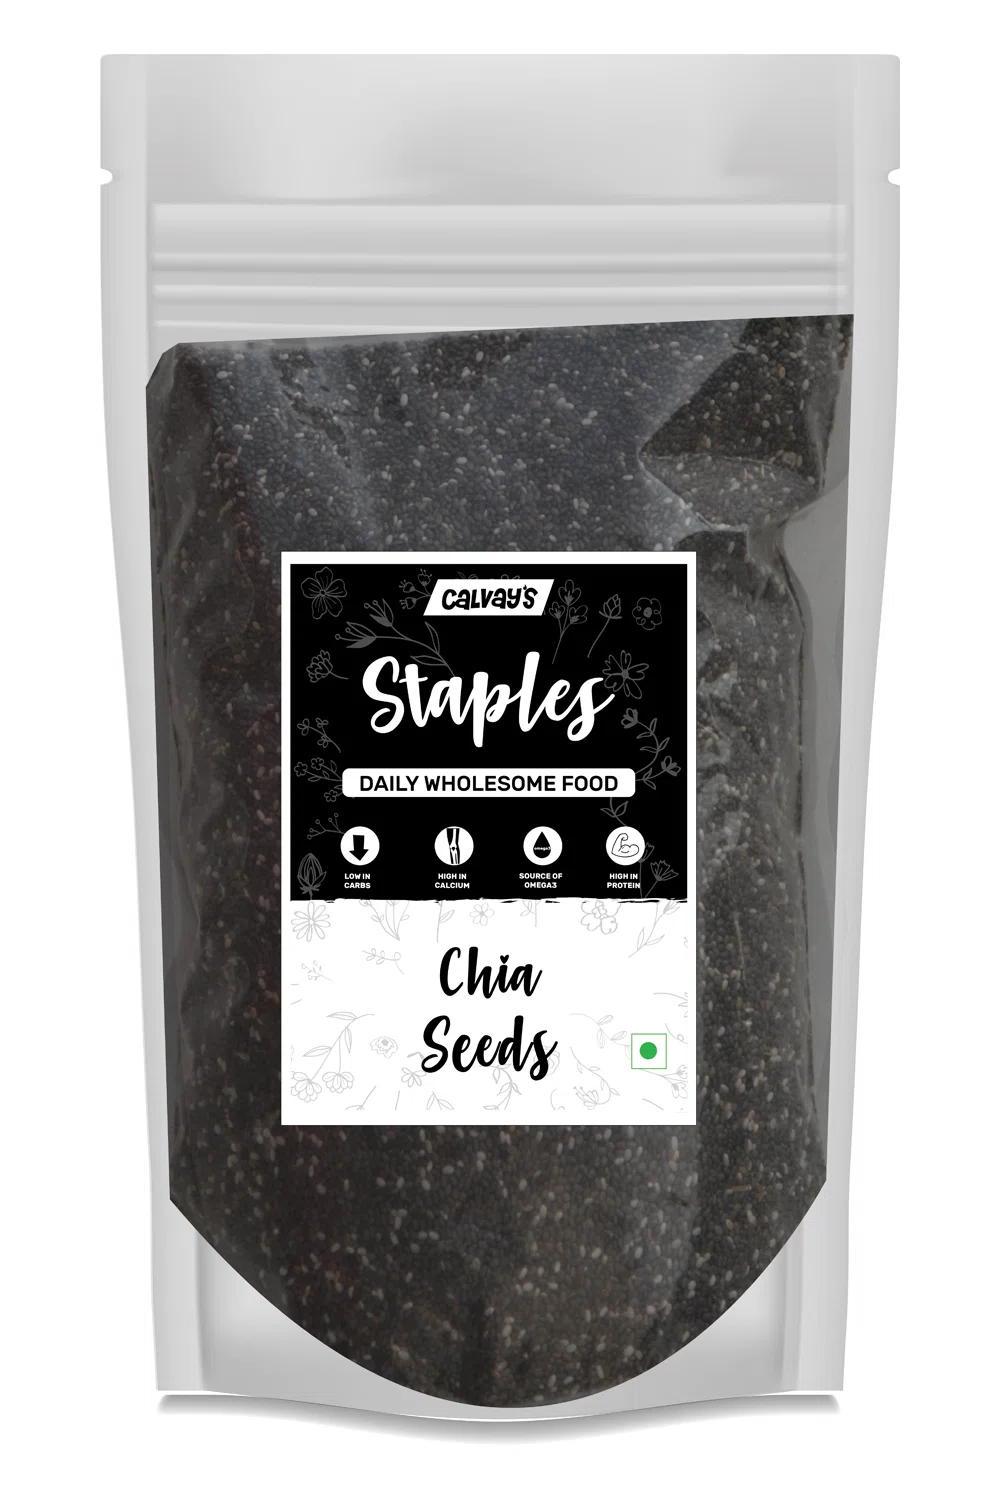 Calvay's Staples Chia seeds front